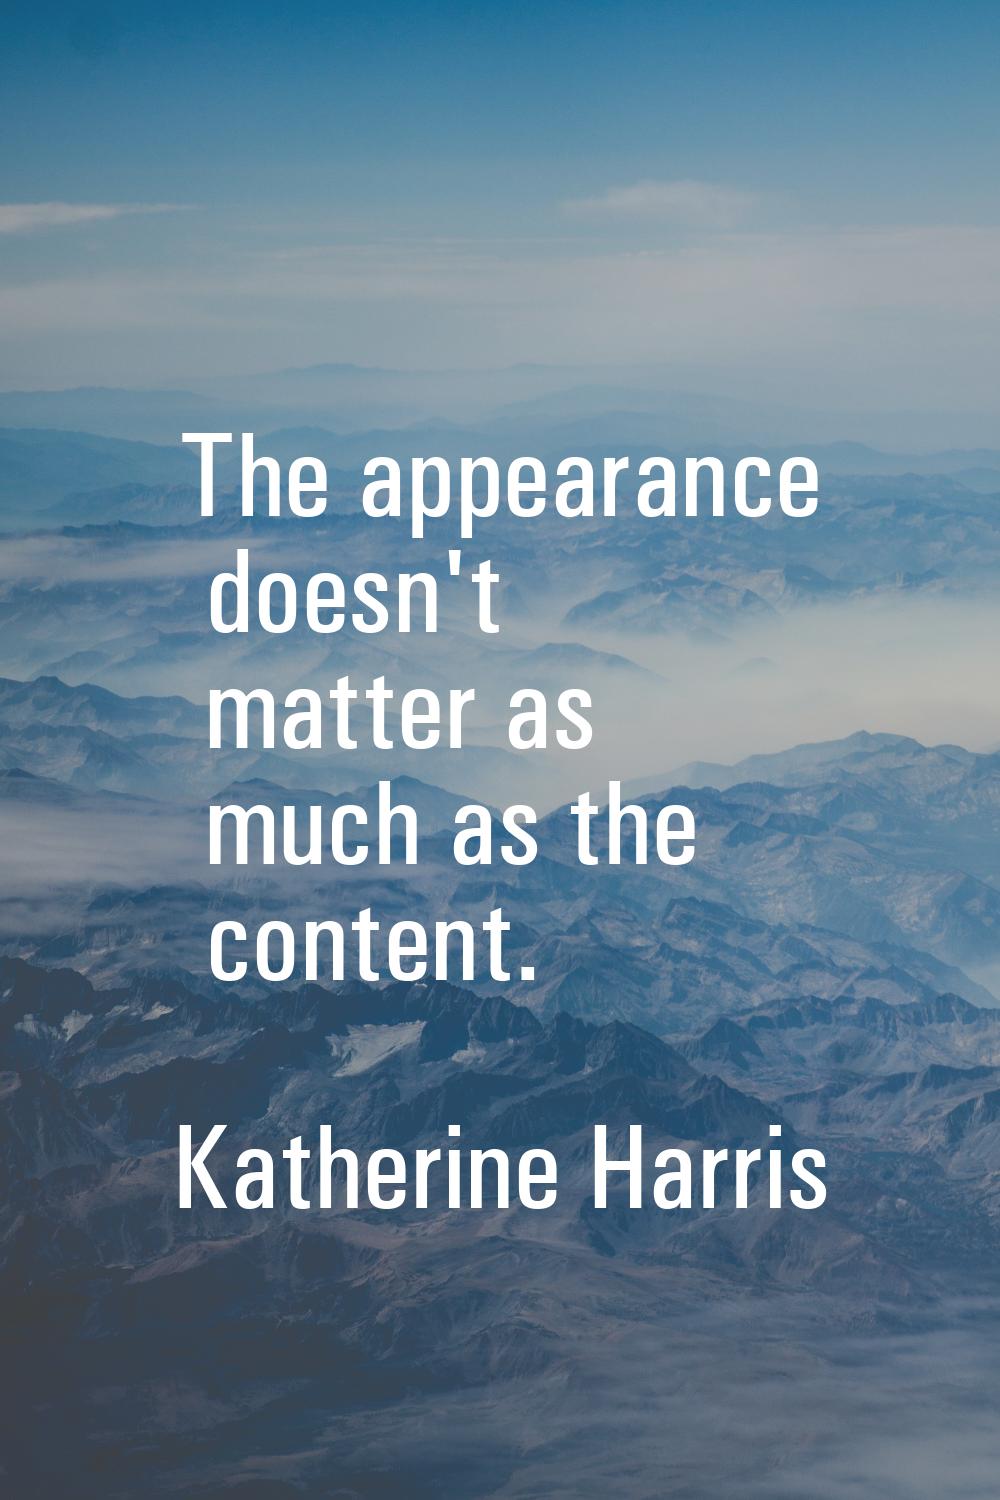 The appearance doesn't matter as much as the content.